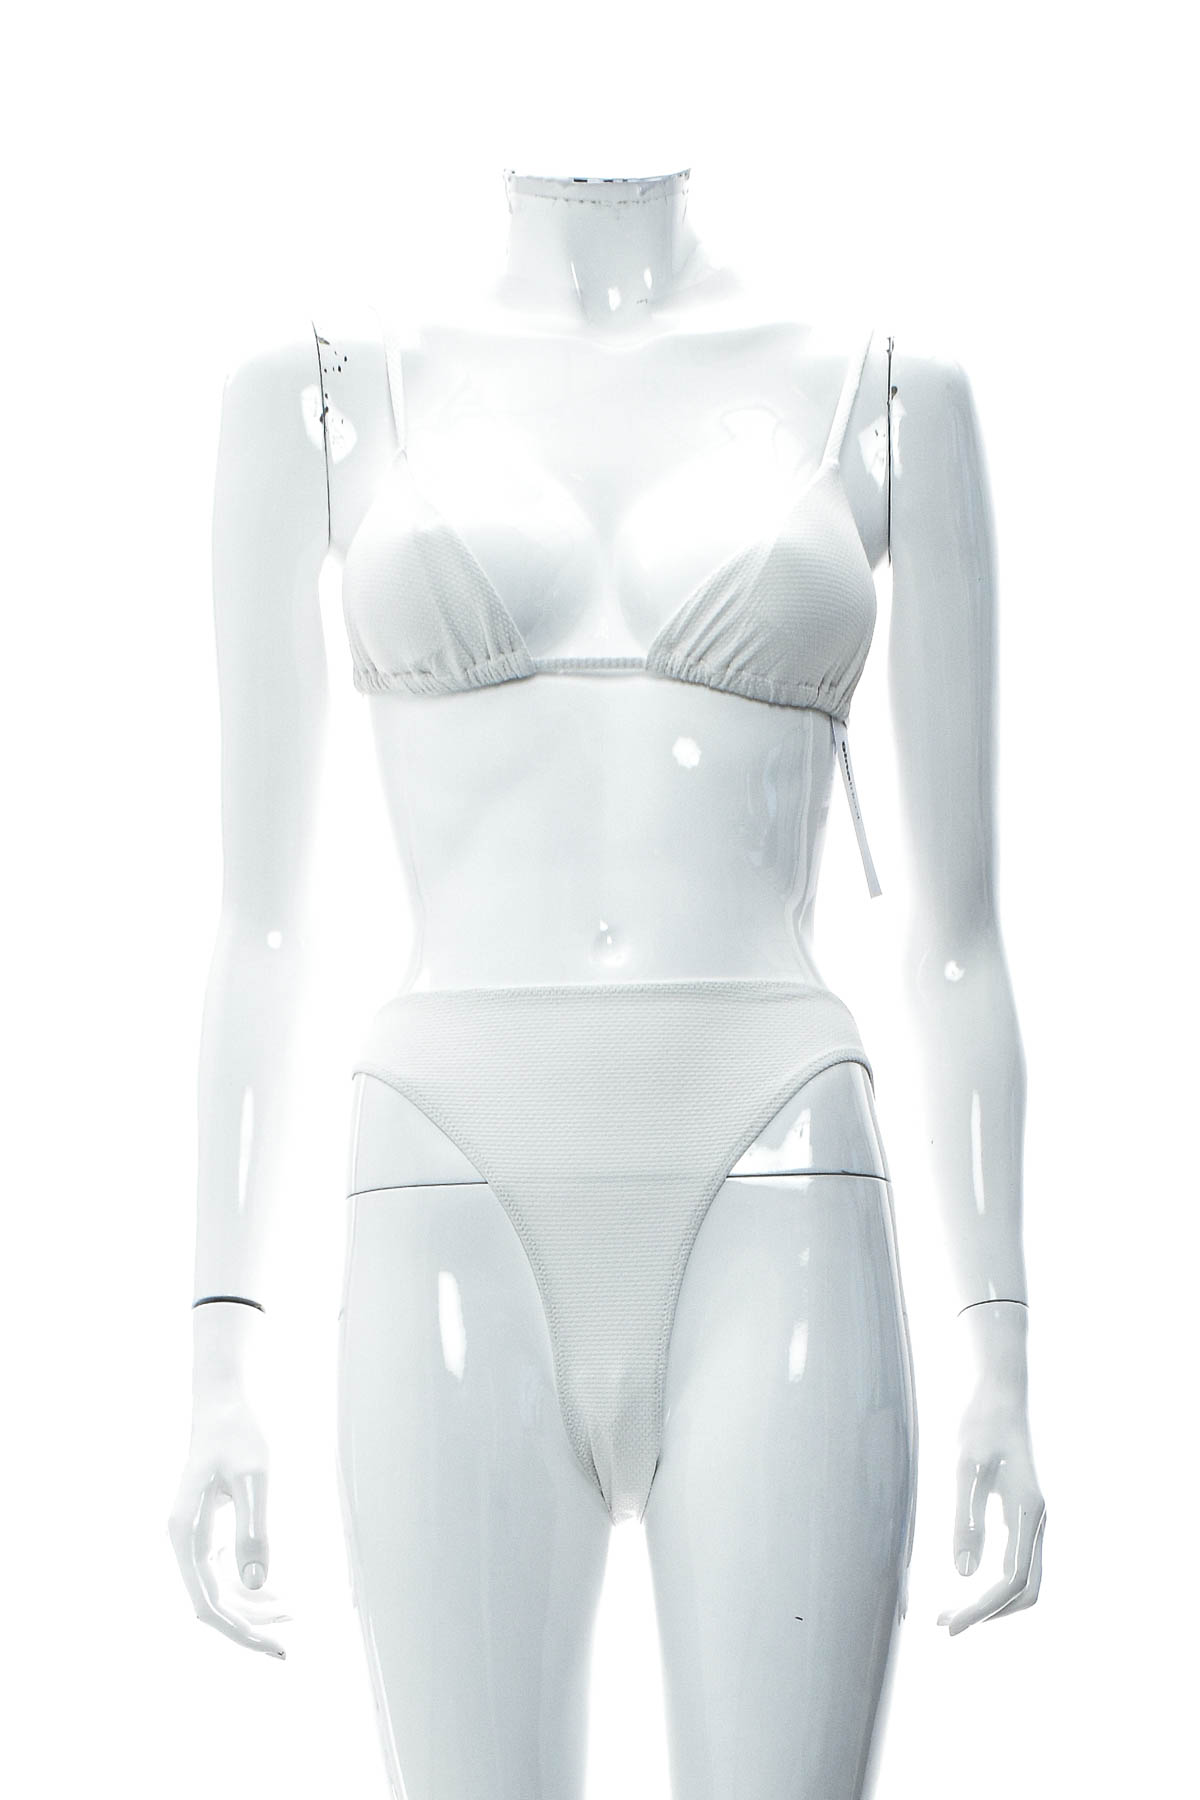 Women's swimsuit - Gina Tricot - 0